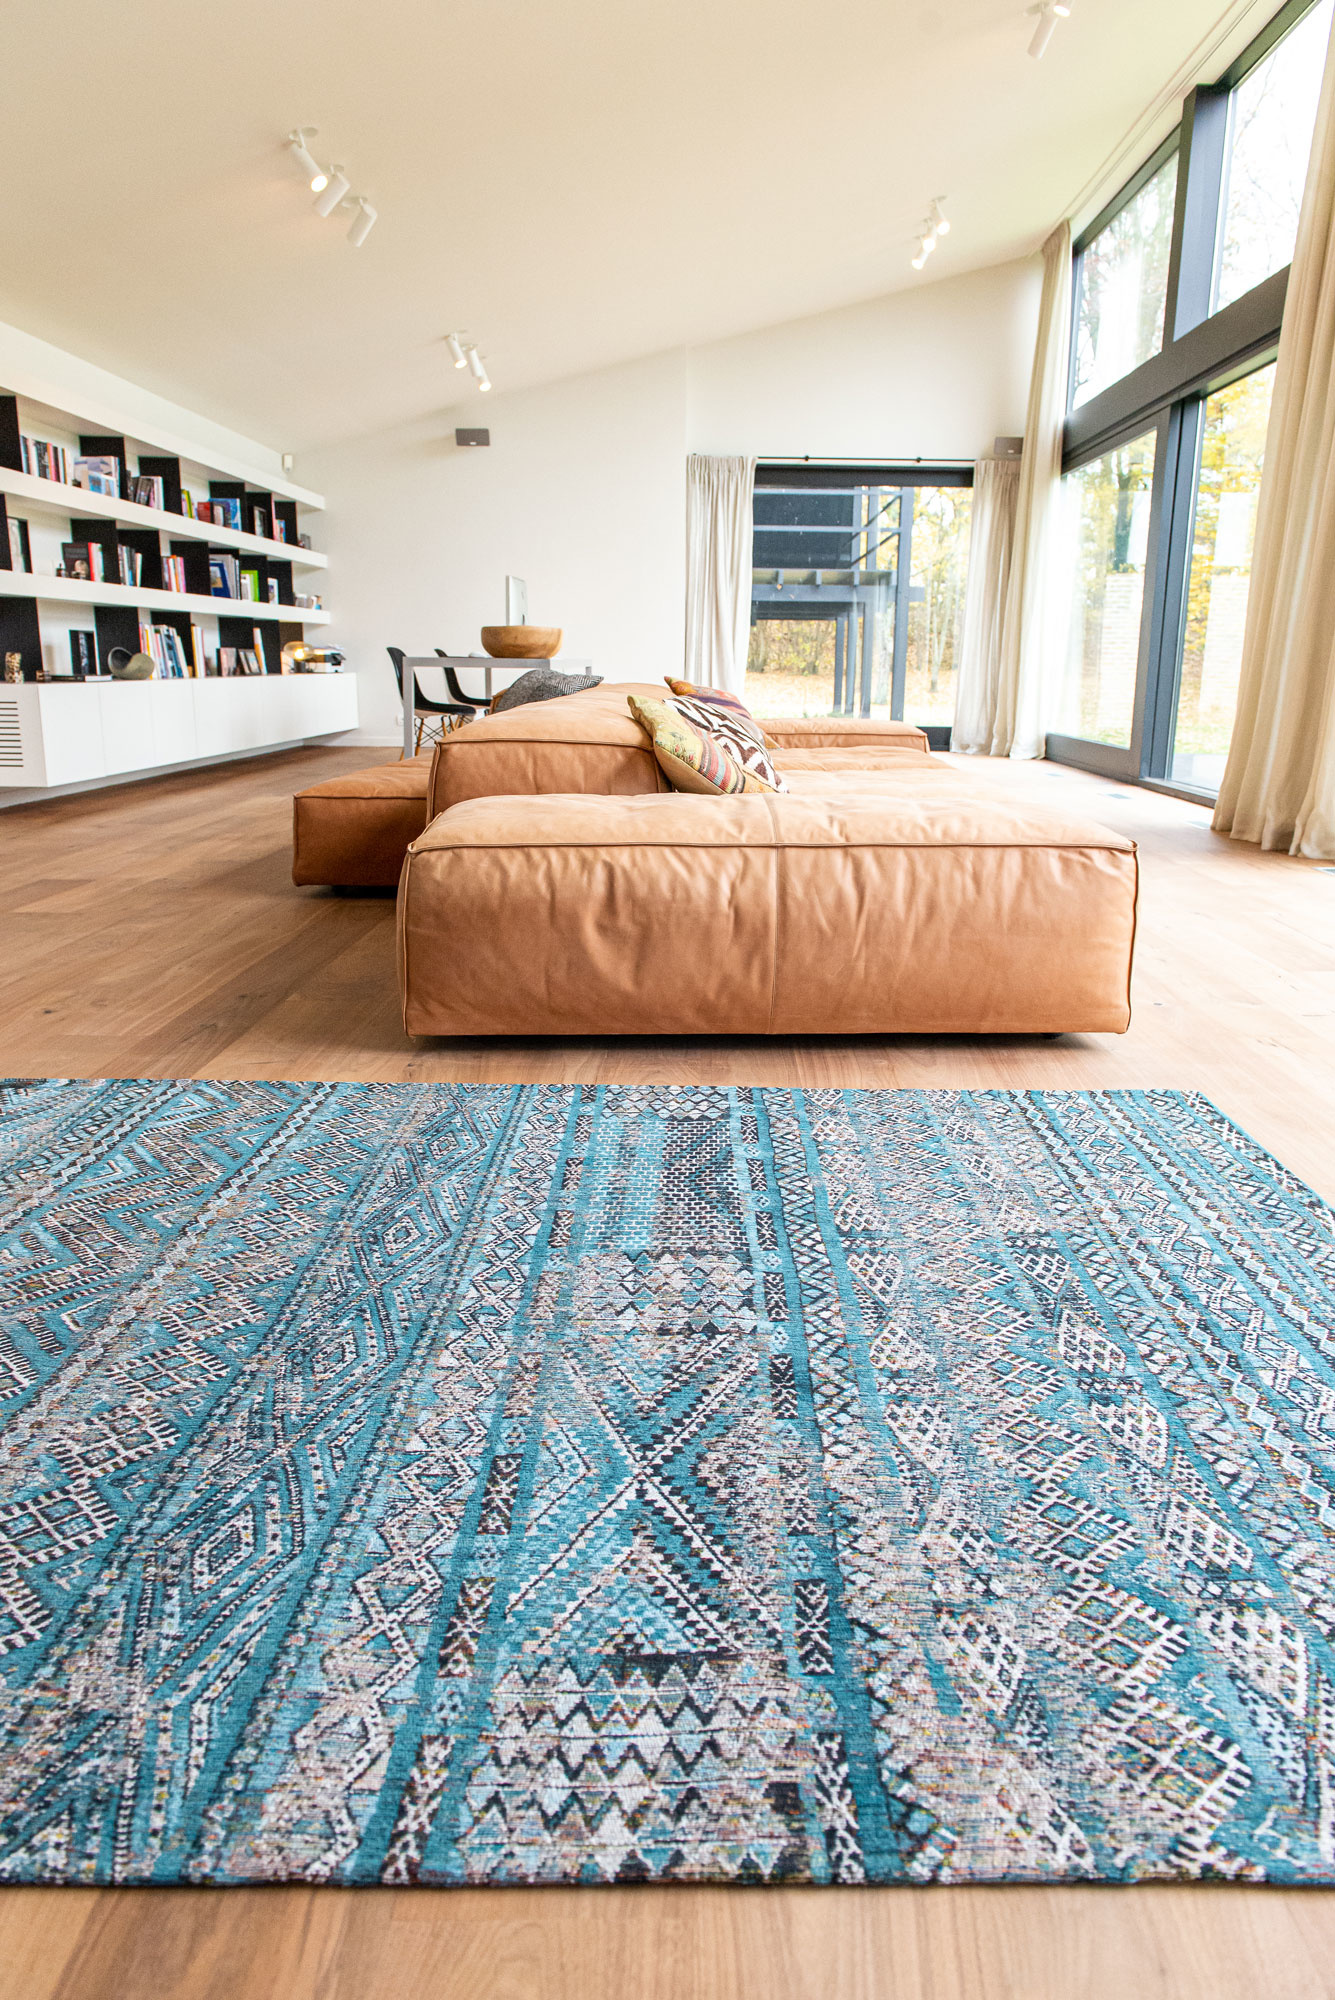 Antiquarian Flatwoven Rug ☞ Size: 6' 7" x 9' 2" (200 x 280 cm)